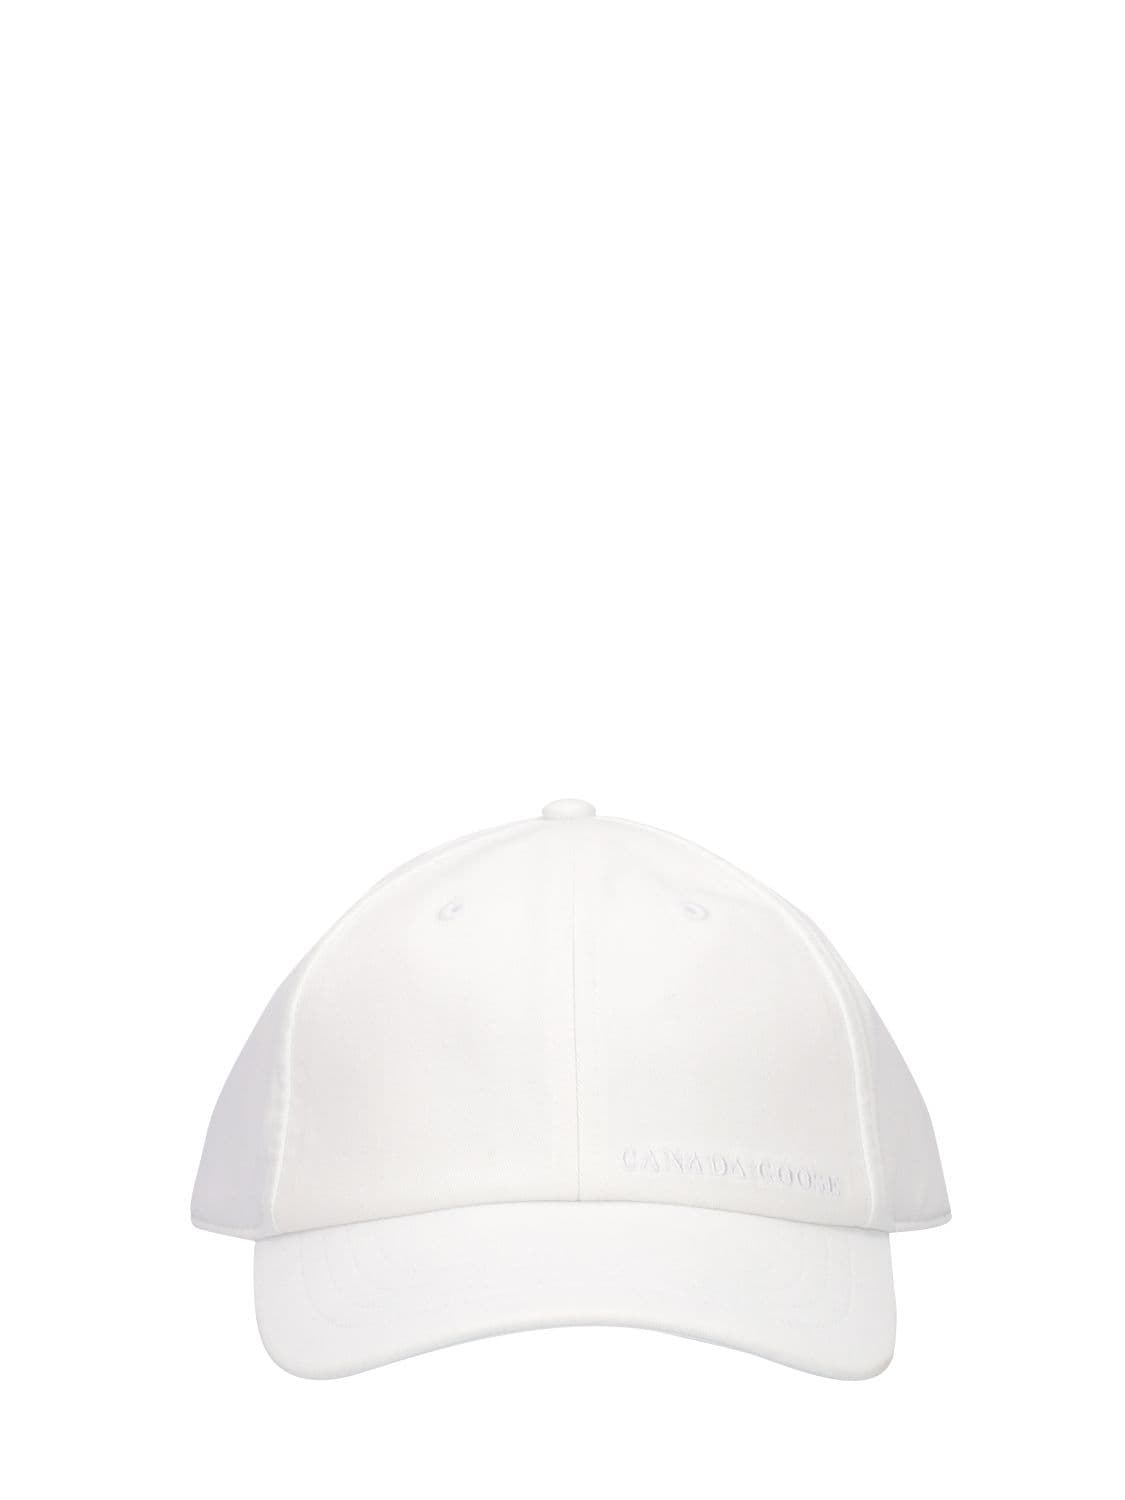 Image of Artic Disc Hat W/ Reflective Detail